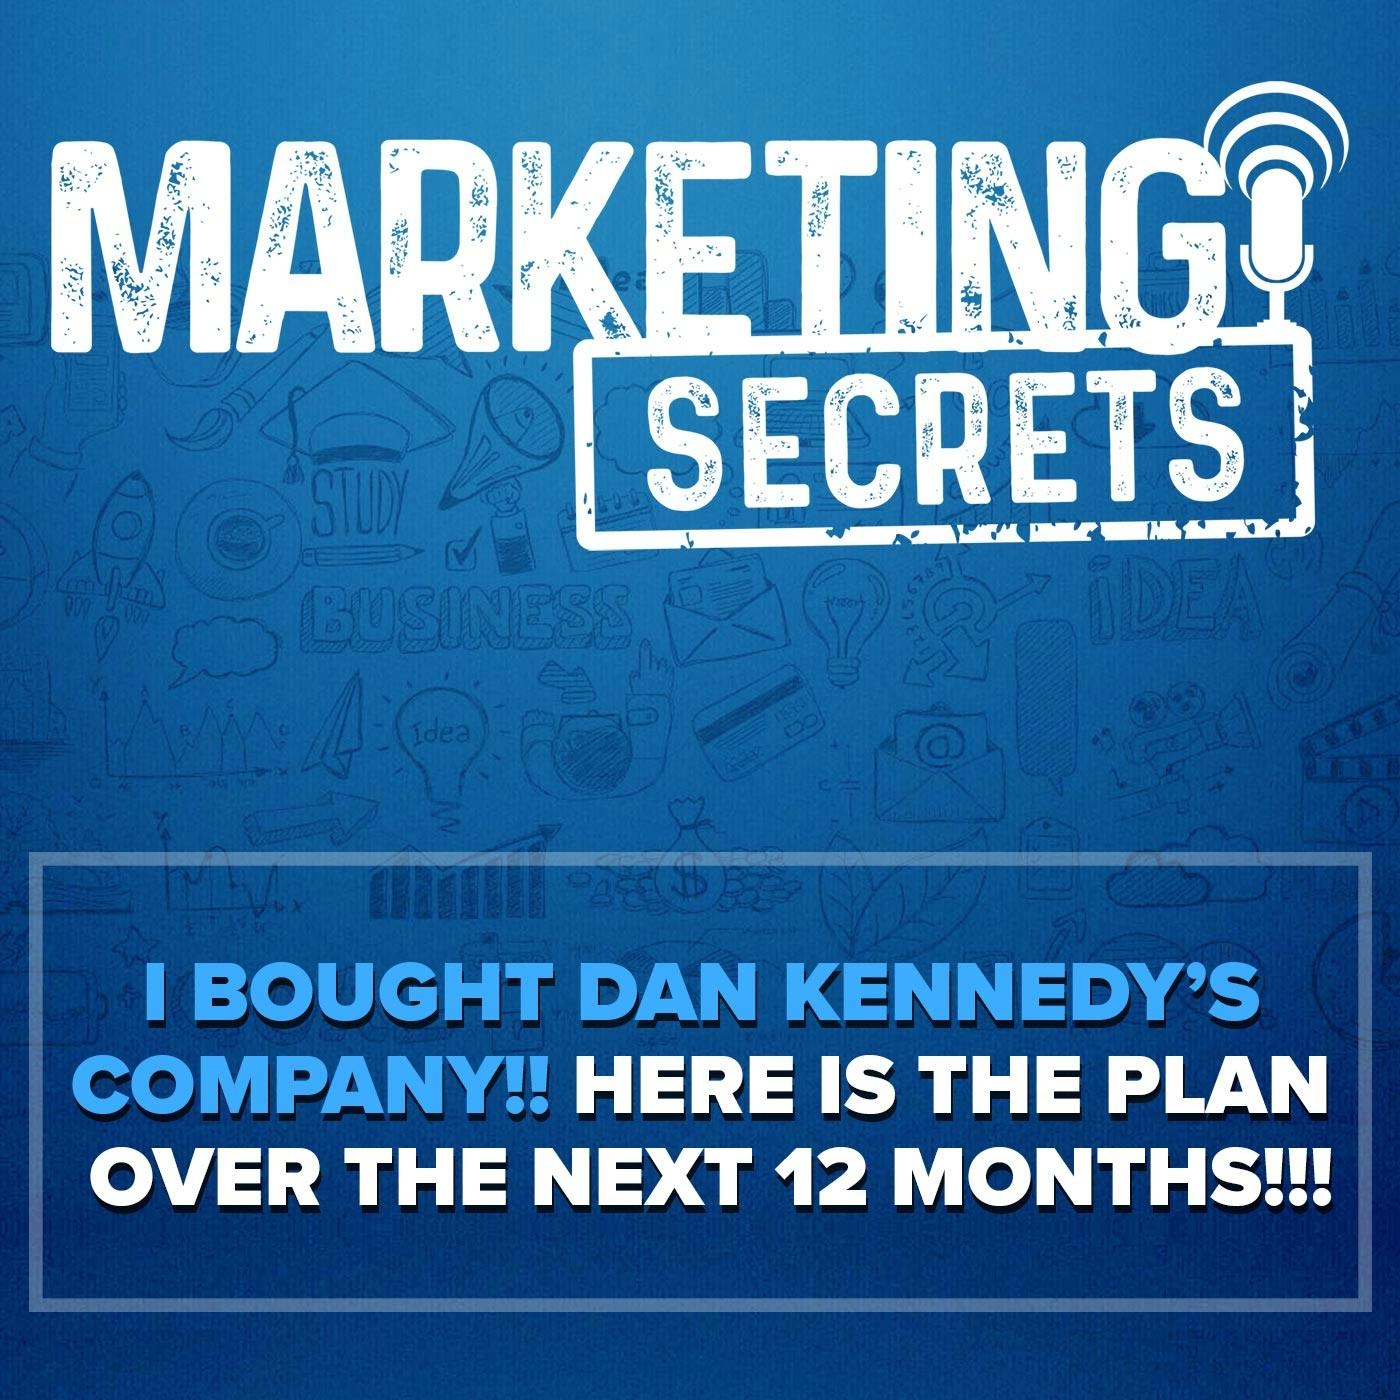 I Bought Dan Kennedy’s Company!! Here is the Plan Over the Next 12 Months!!!